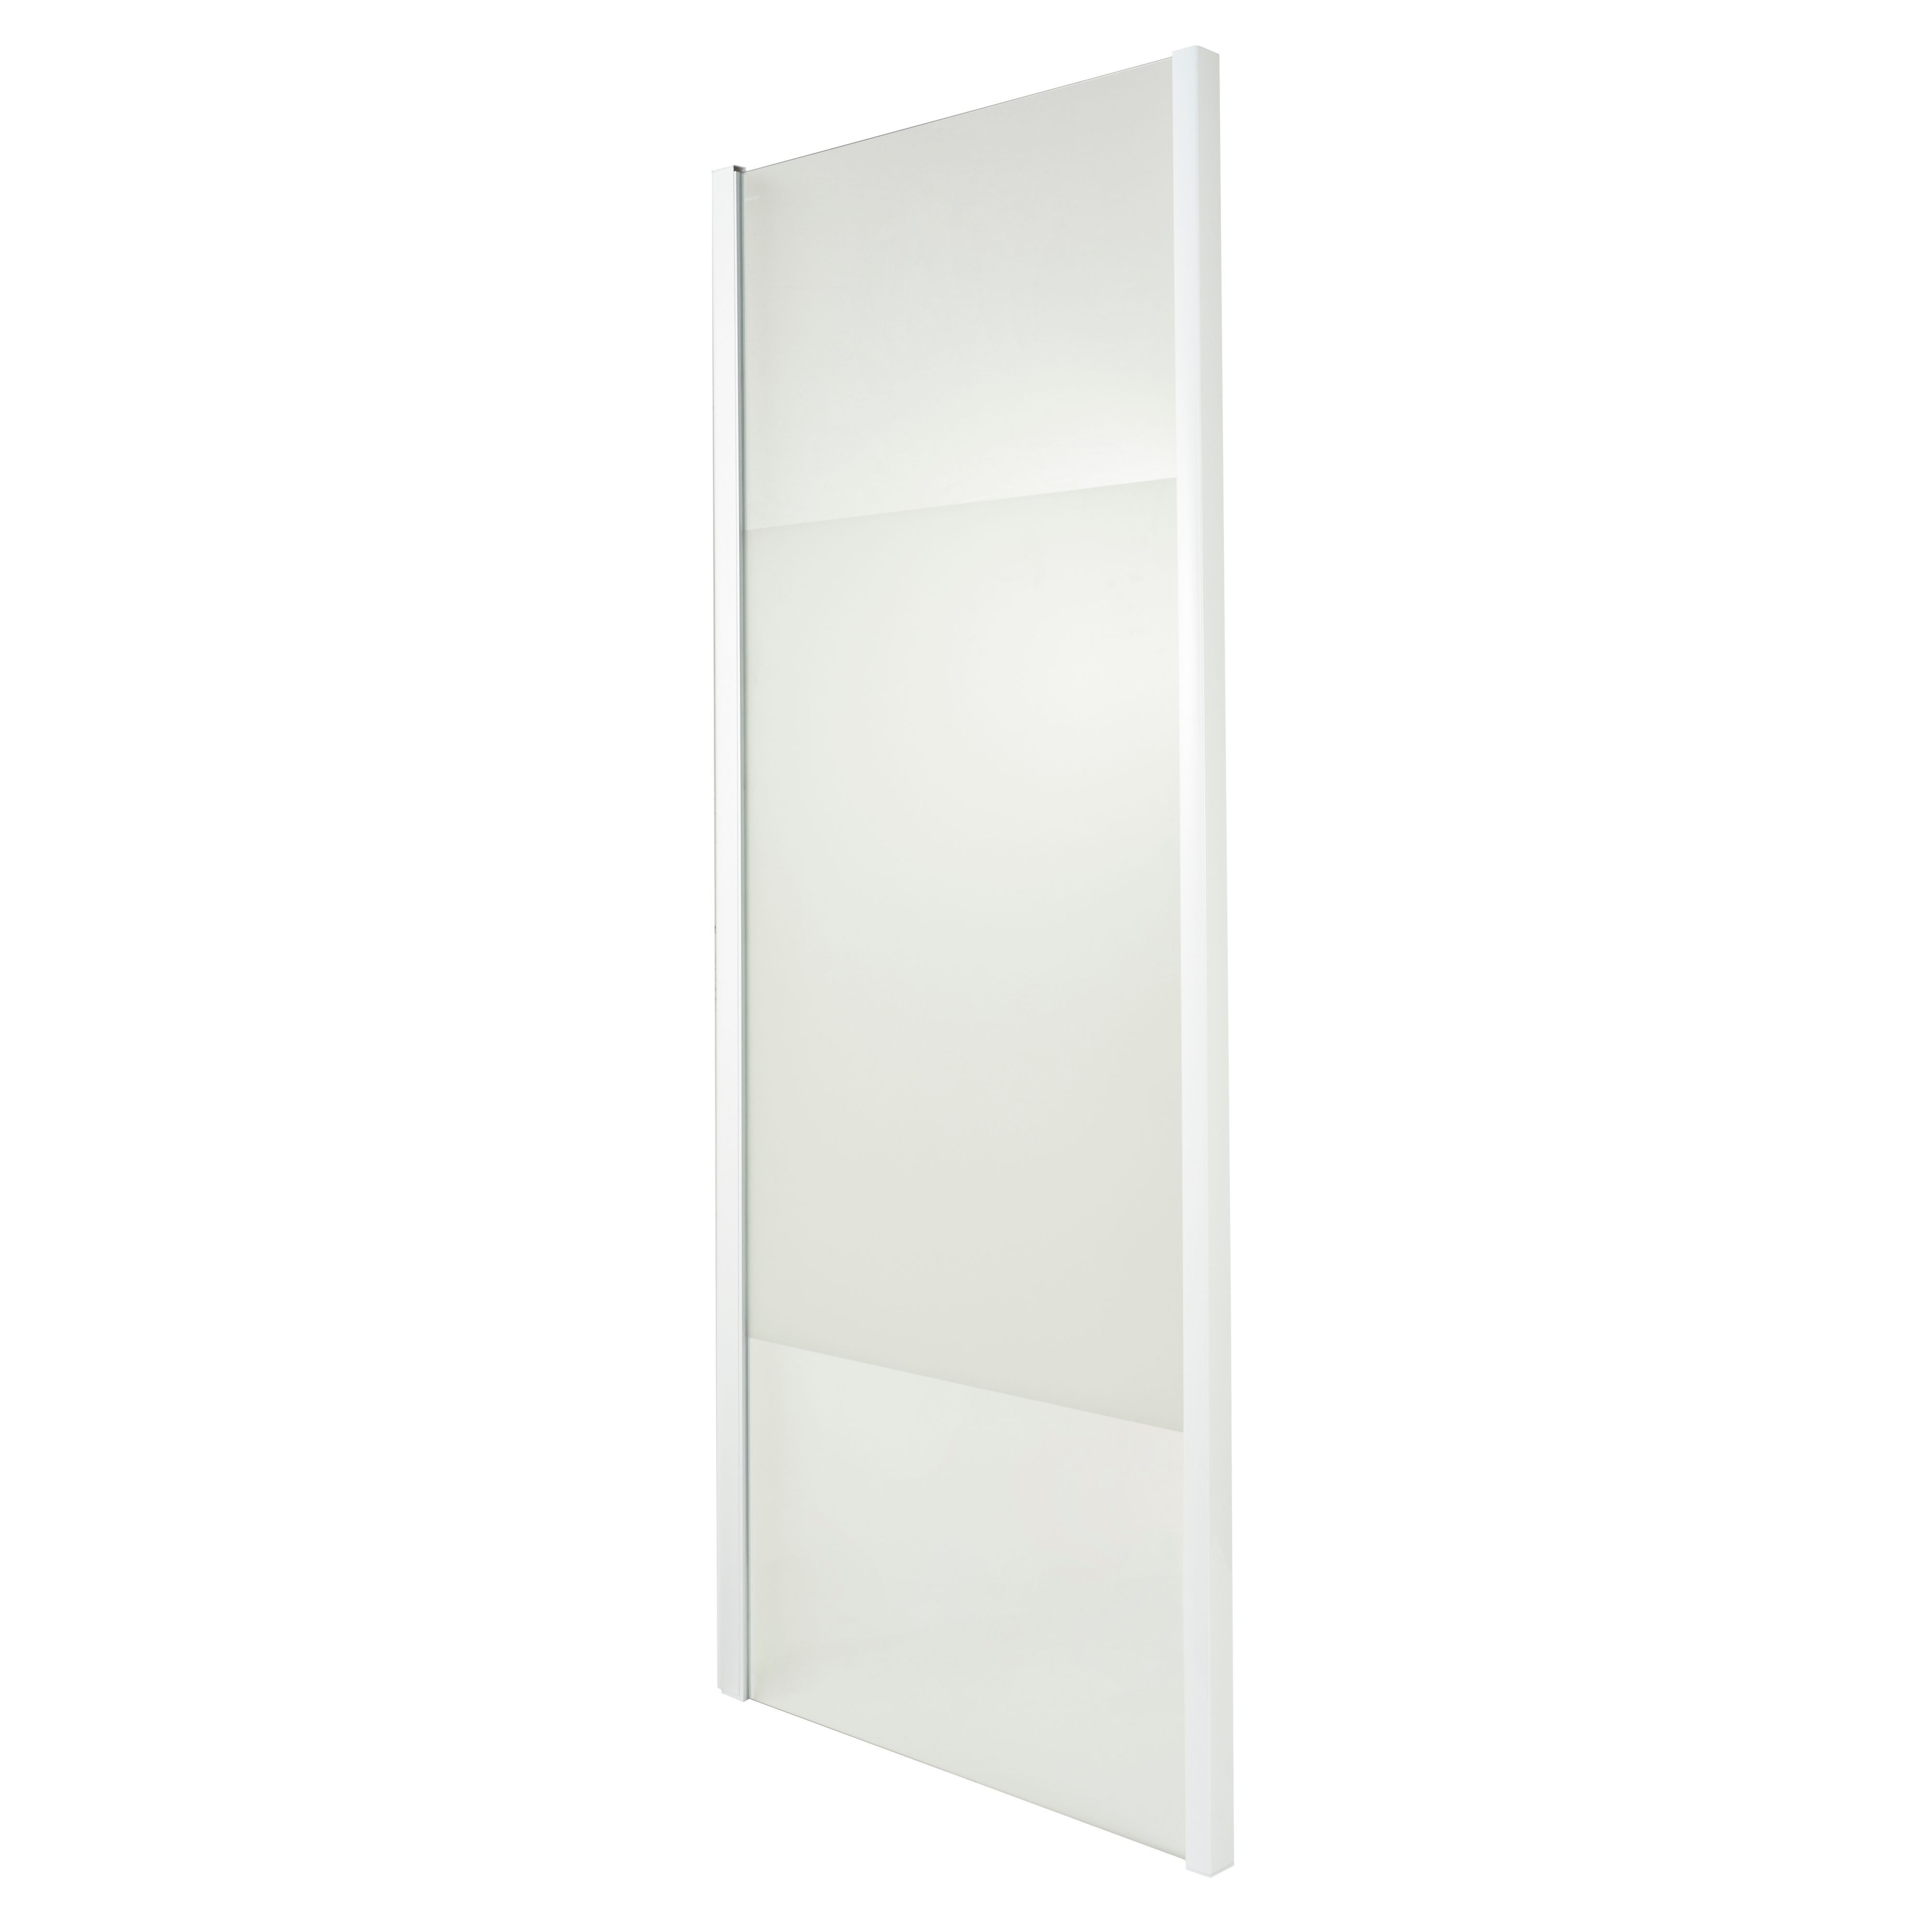 Cooke & Lewis Onega White coated Frosted Fixed Shower panel (H)190cm (W)80cm